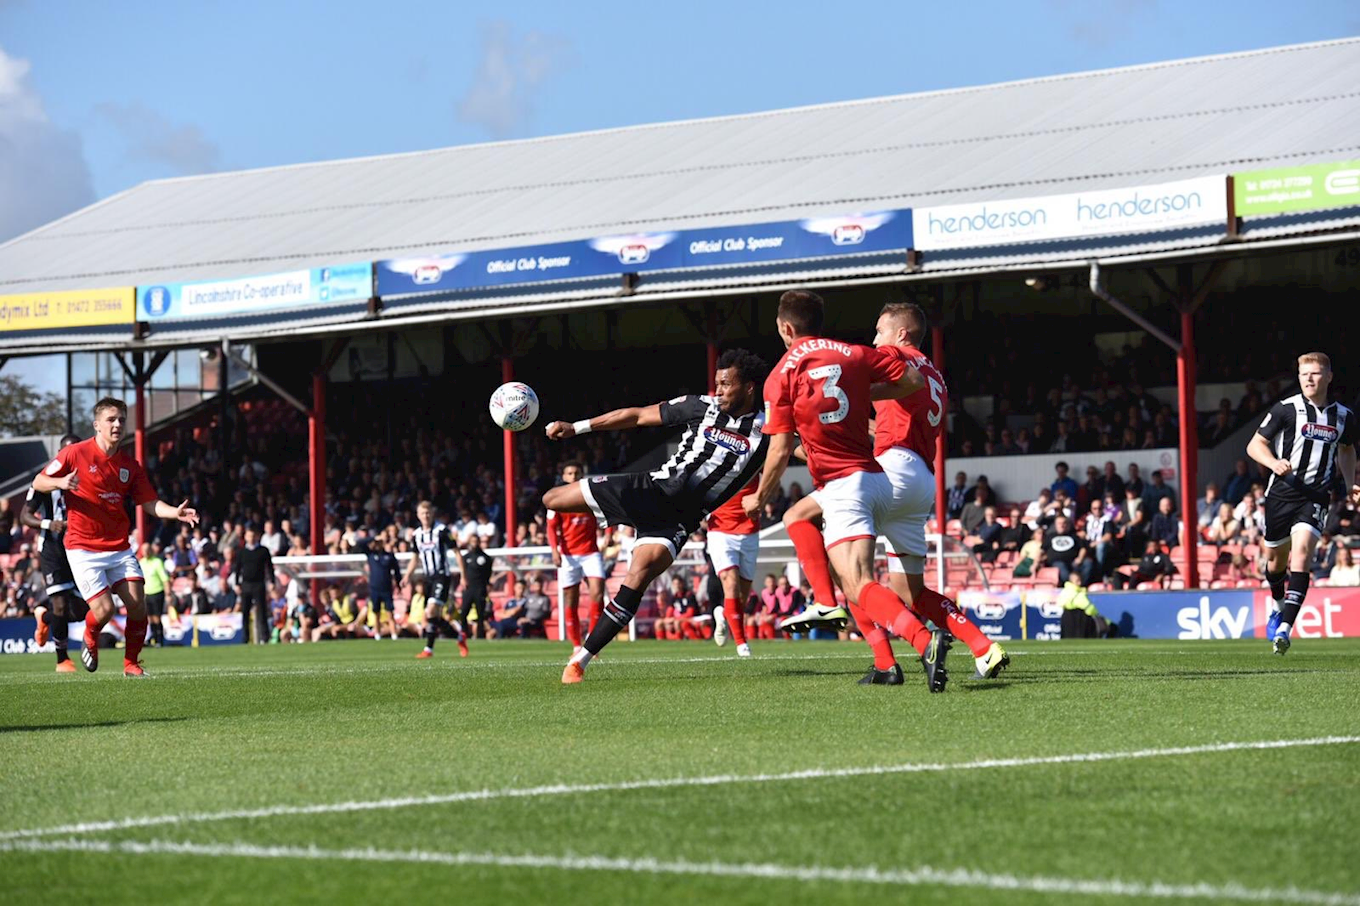 grimsby town players in action